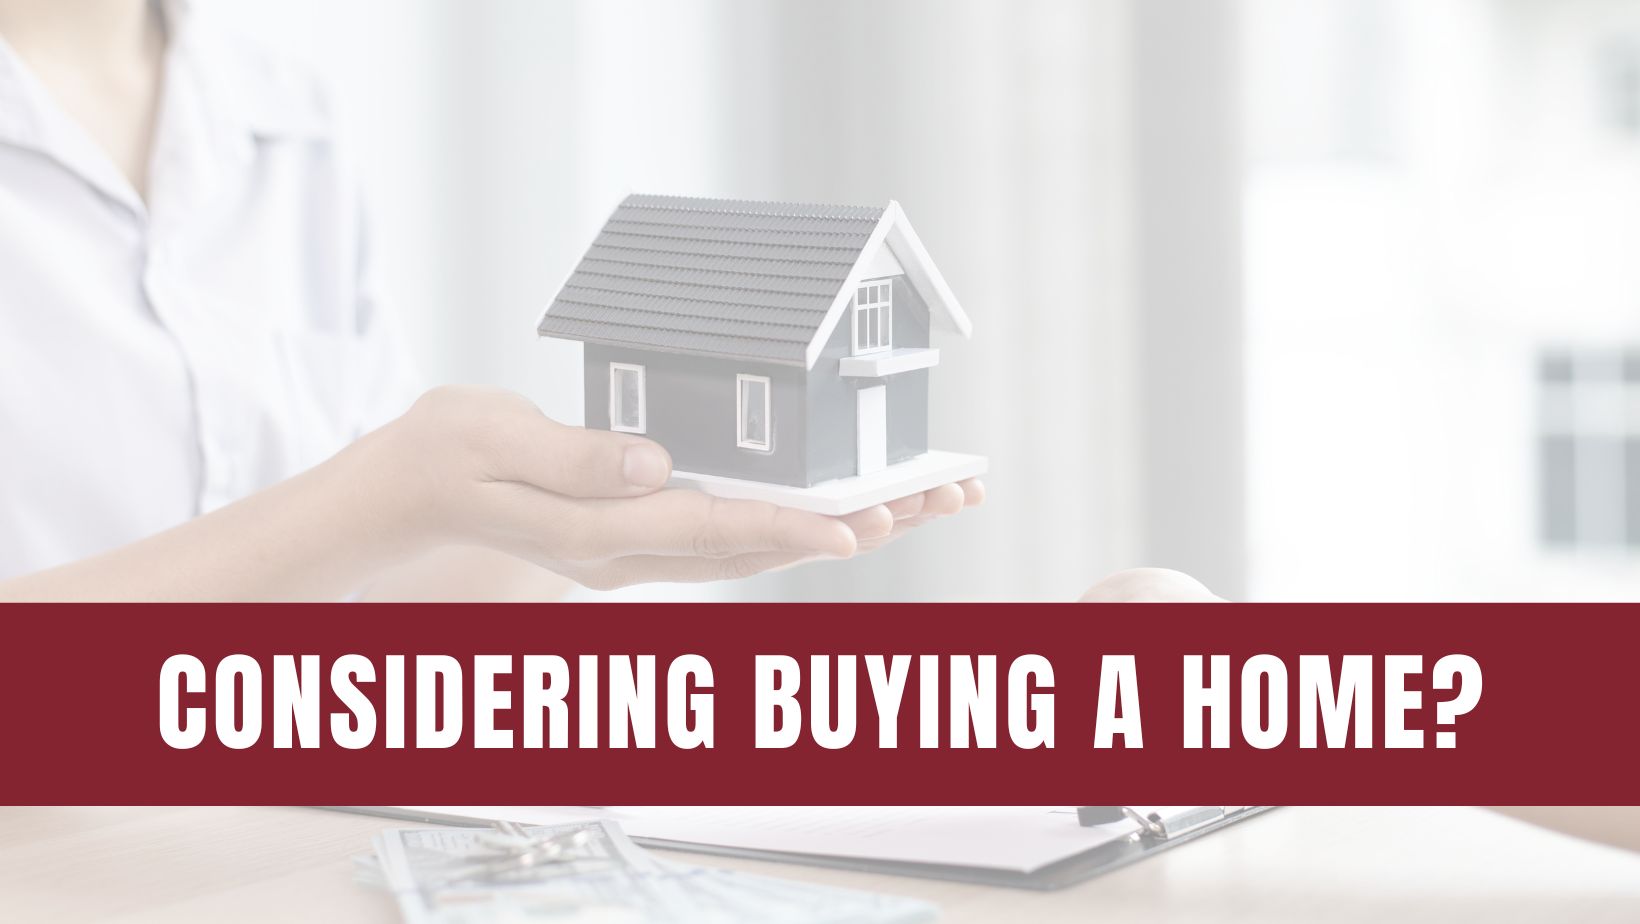 Two Questions To Ask Yourself if You’re Considering Buying a Home